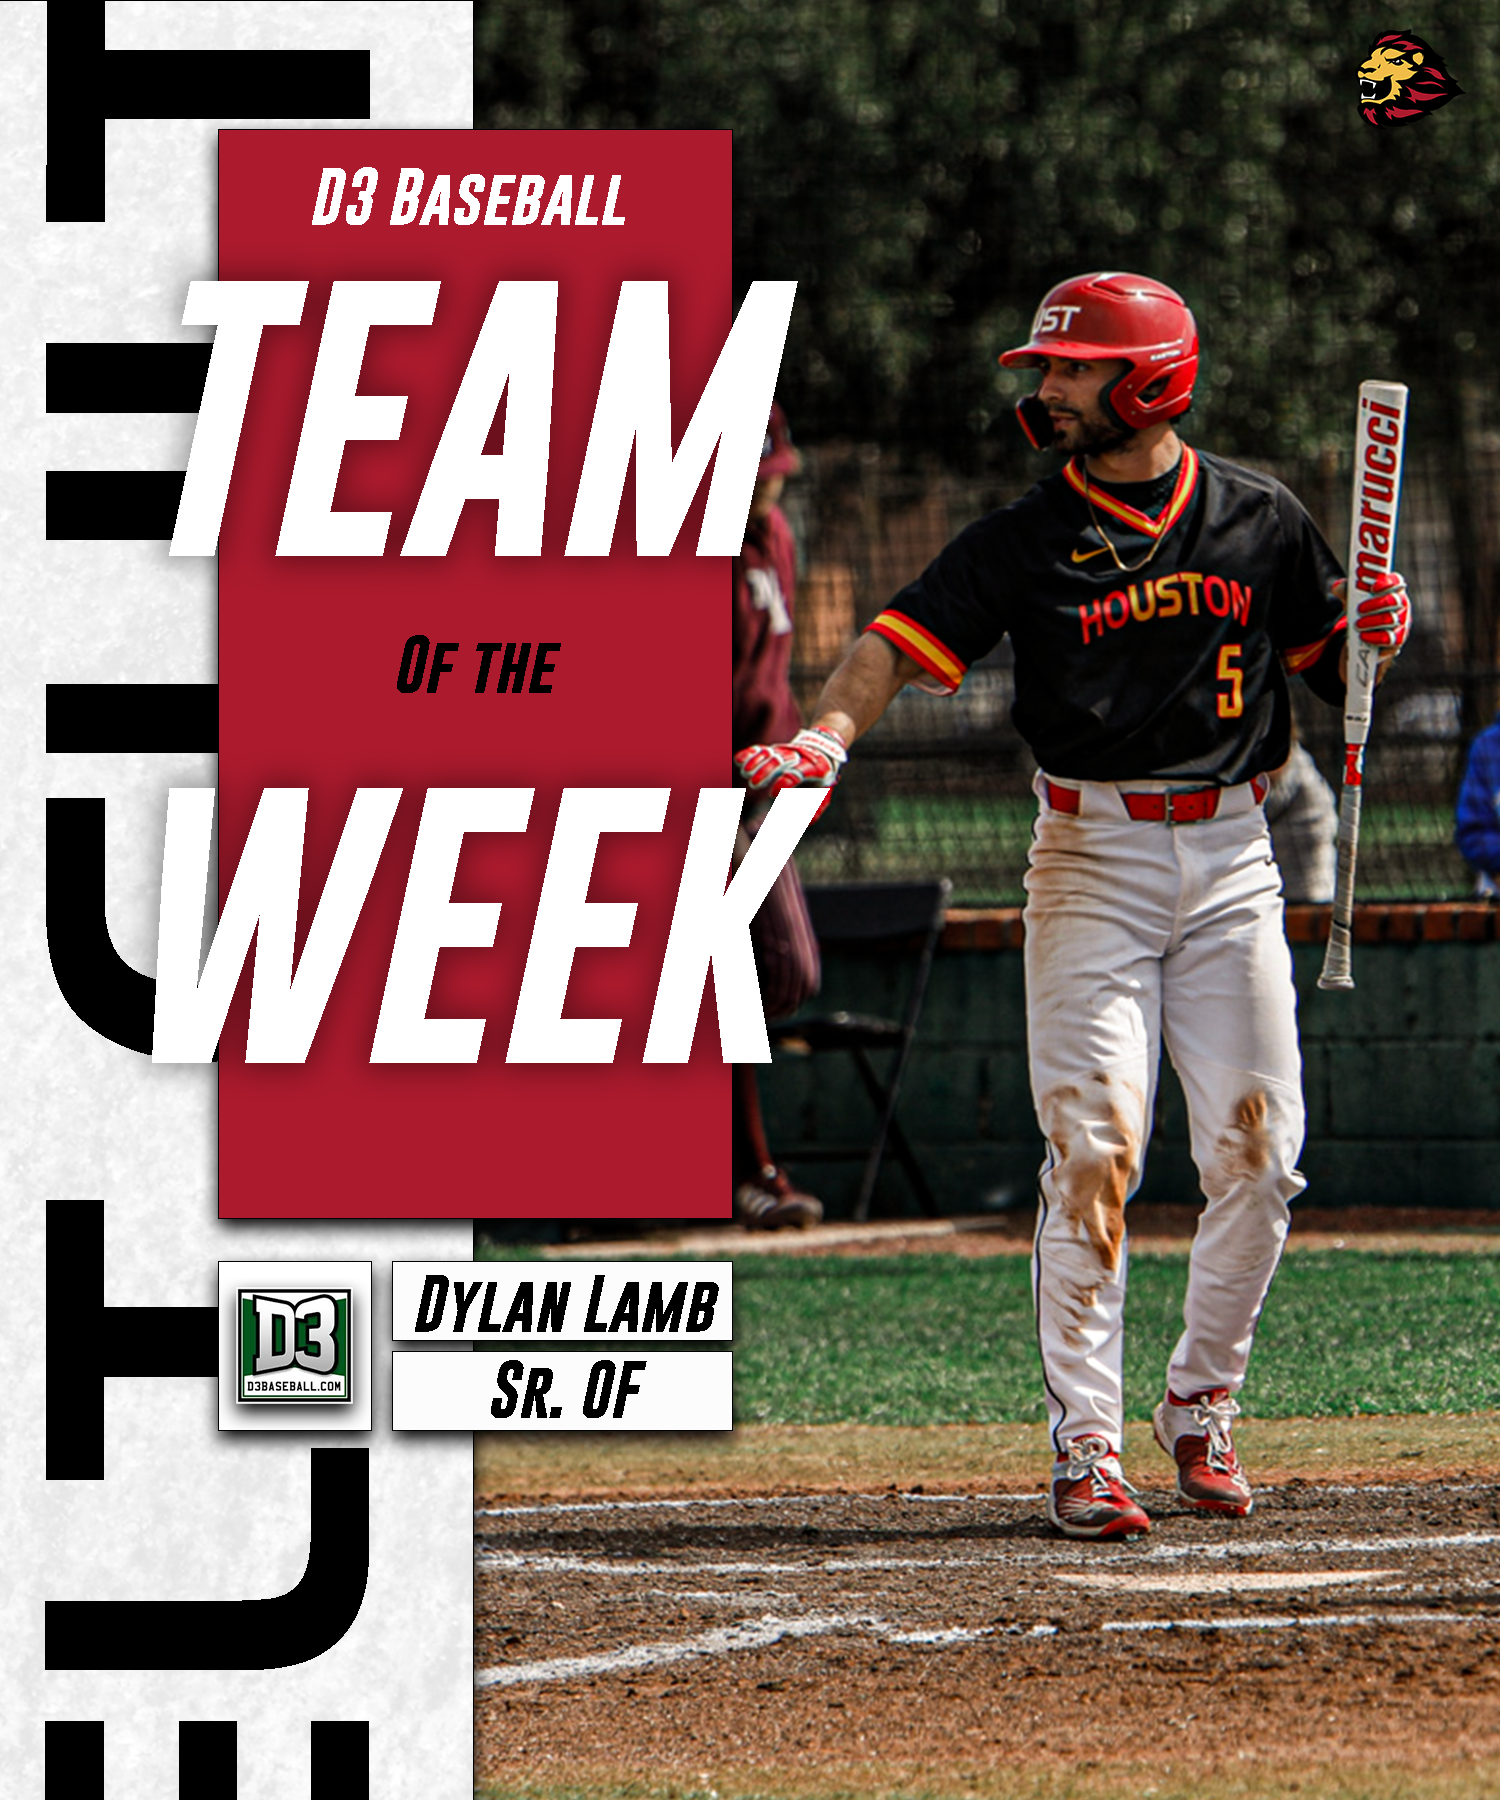 Dylan Lamb named to DIII Baseball Team of the Week